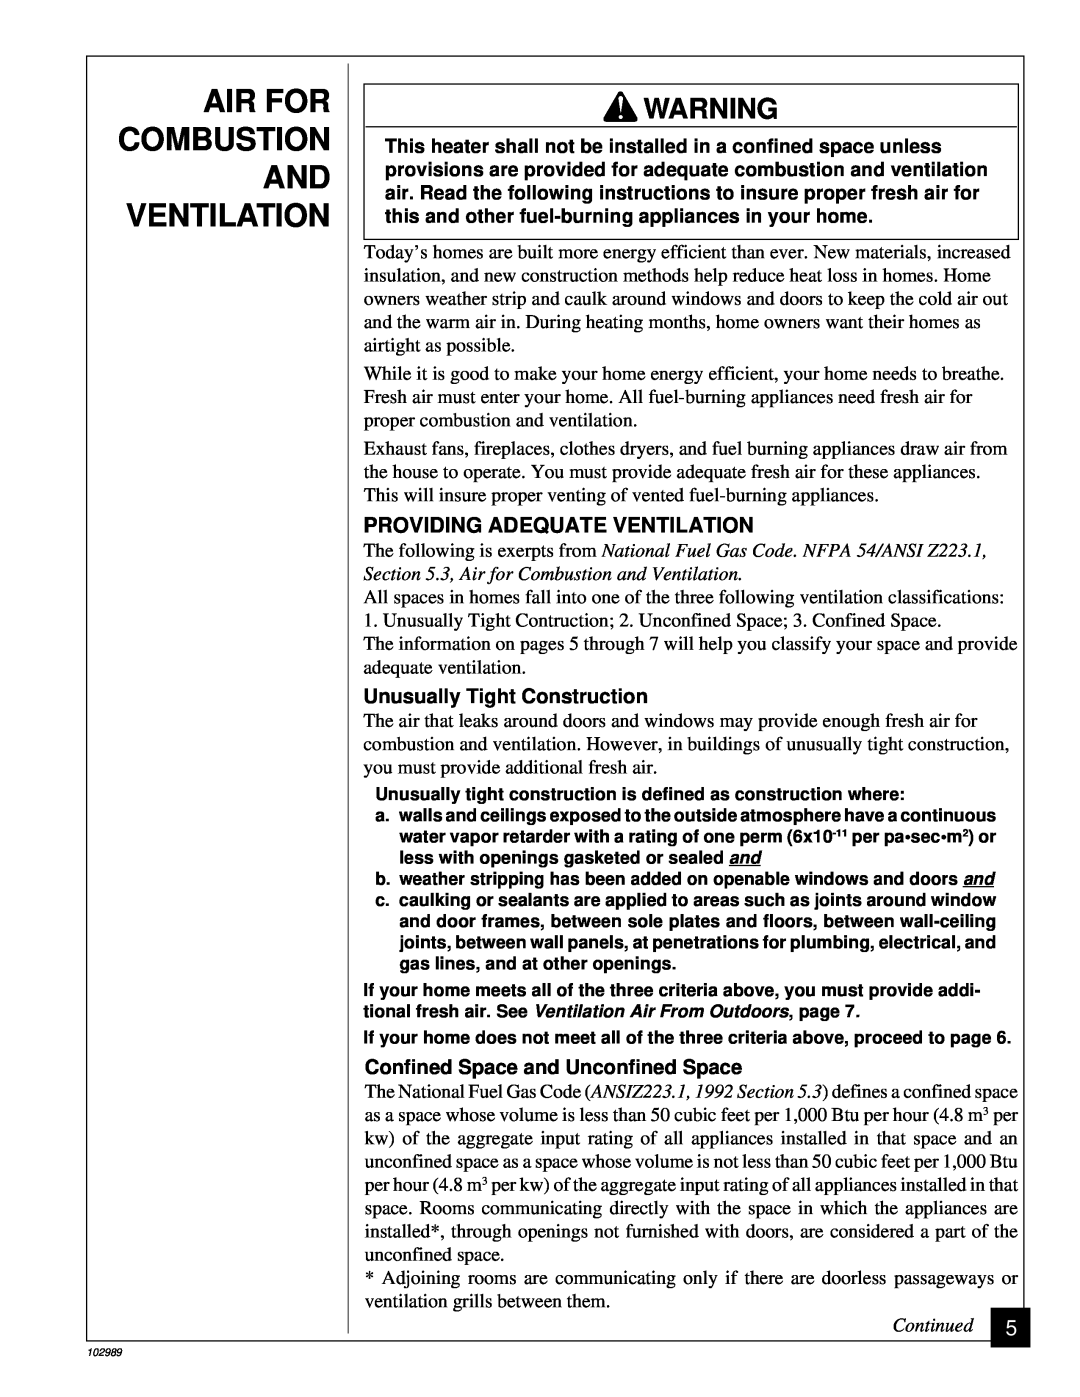 Desa CGS2718P installation manual Air For Combustion And Ventilation, Providing Adequate Ventilation, Continued 